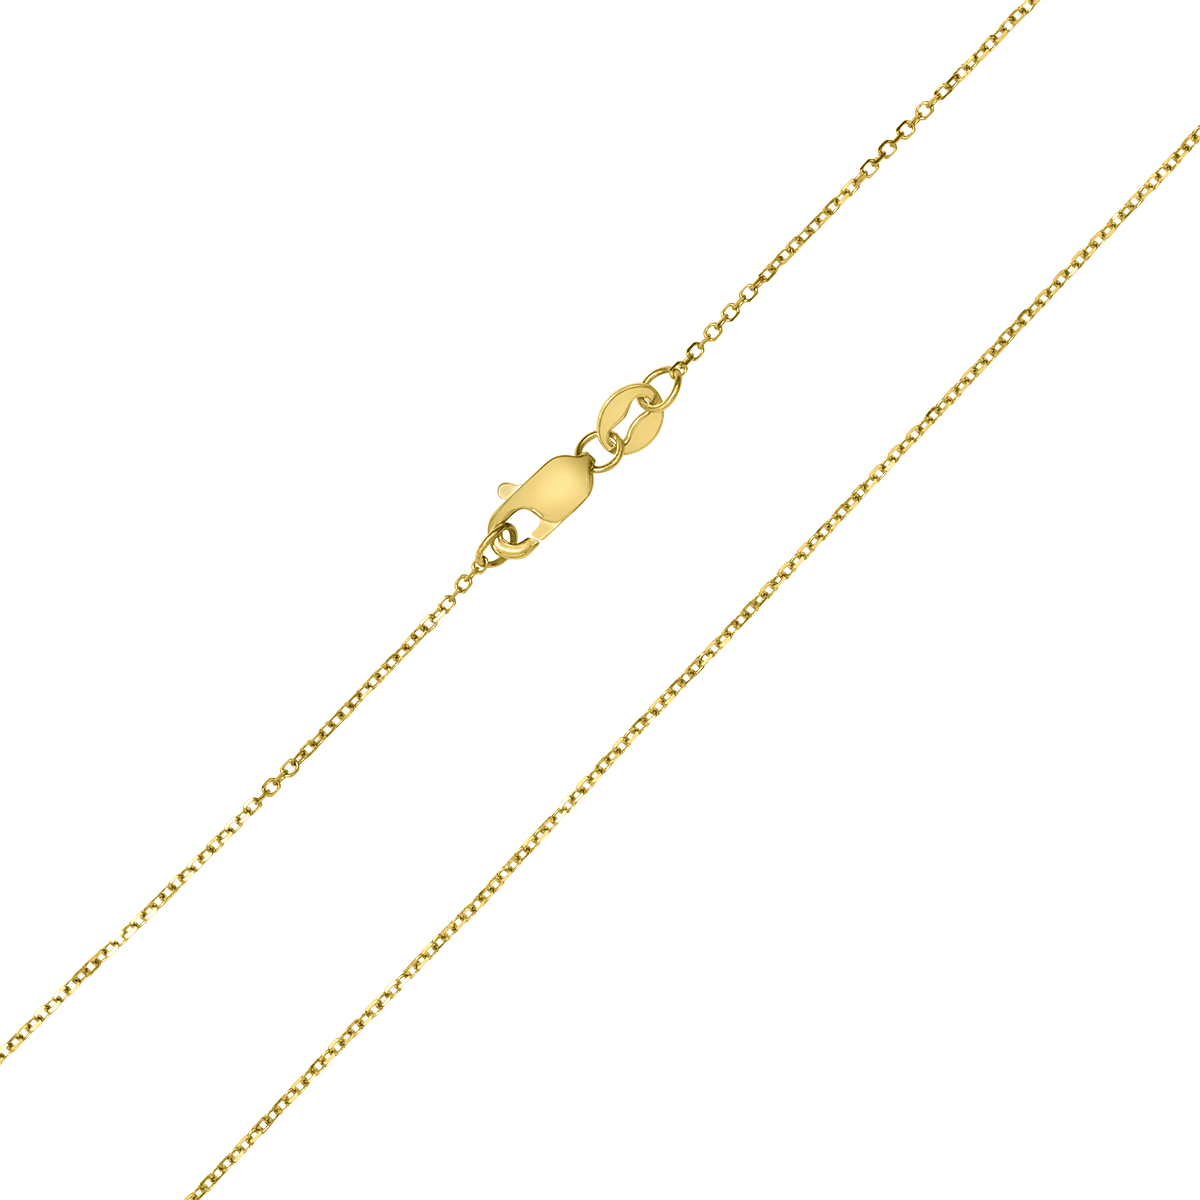 10K Yellow Gold 0.8MM Shiny Cable Chain with Lobster Clasp - 16 Inch